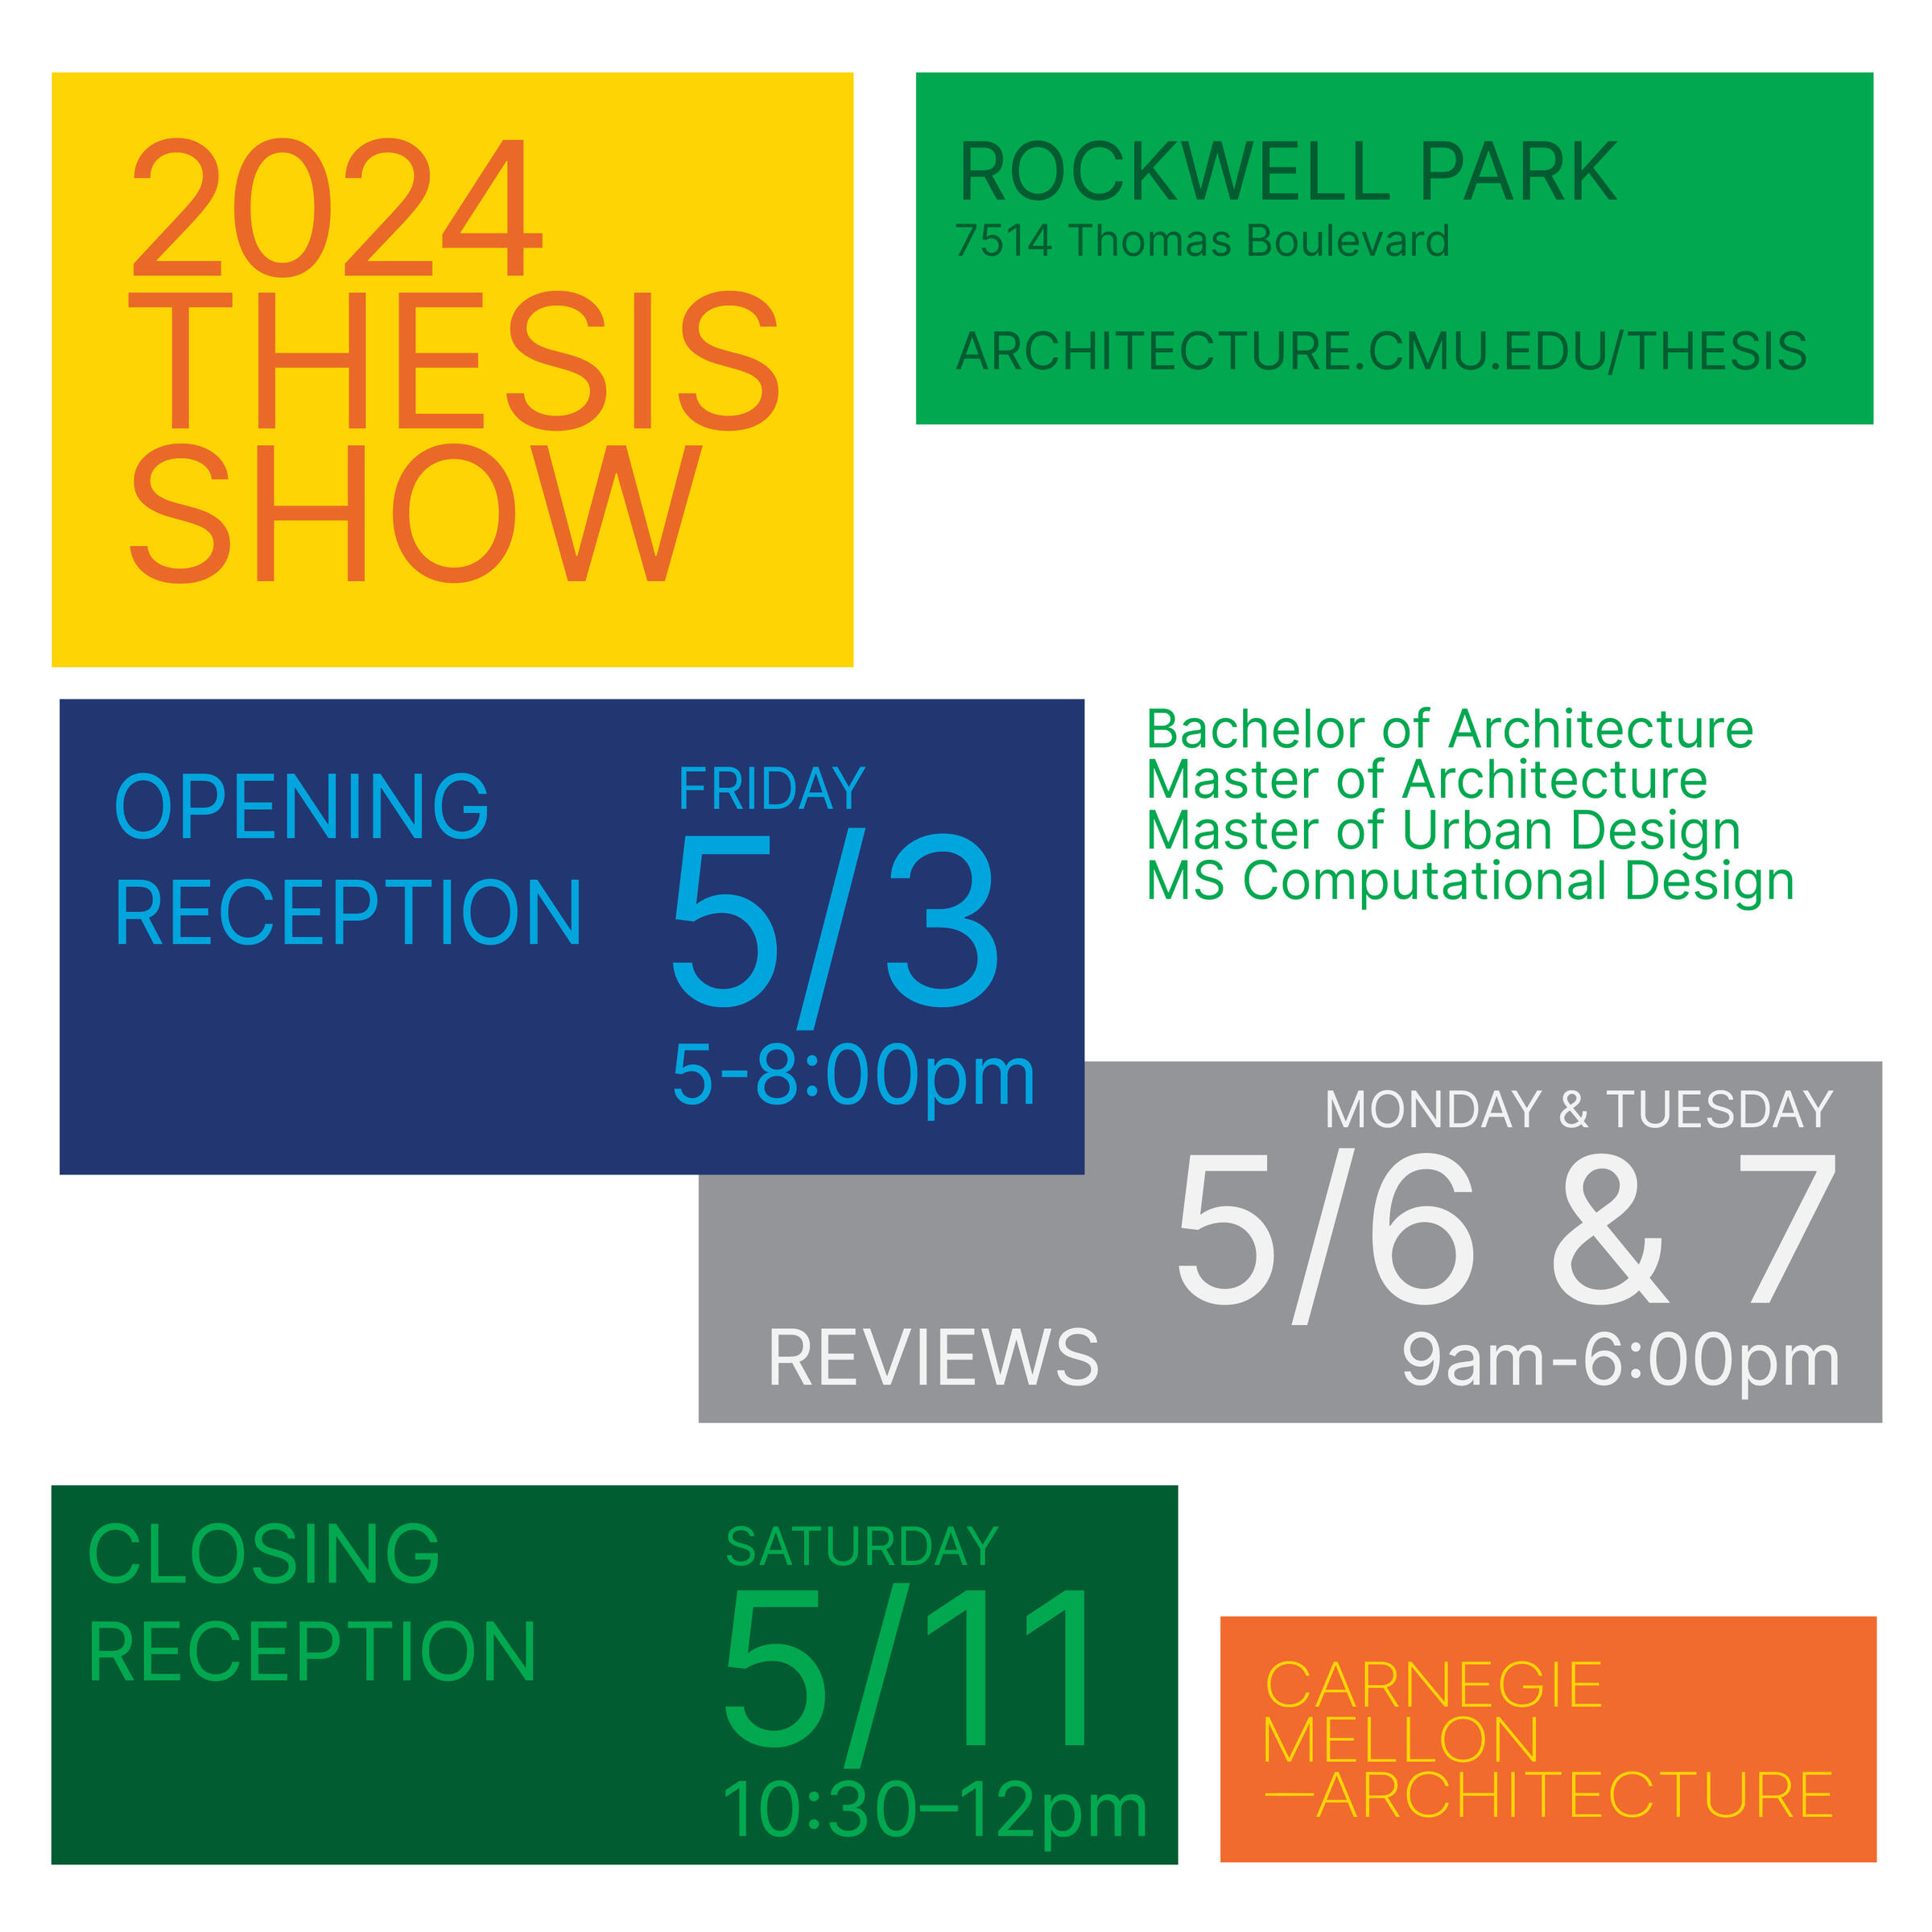 Invitation to 2024 thesis show